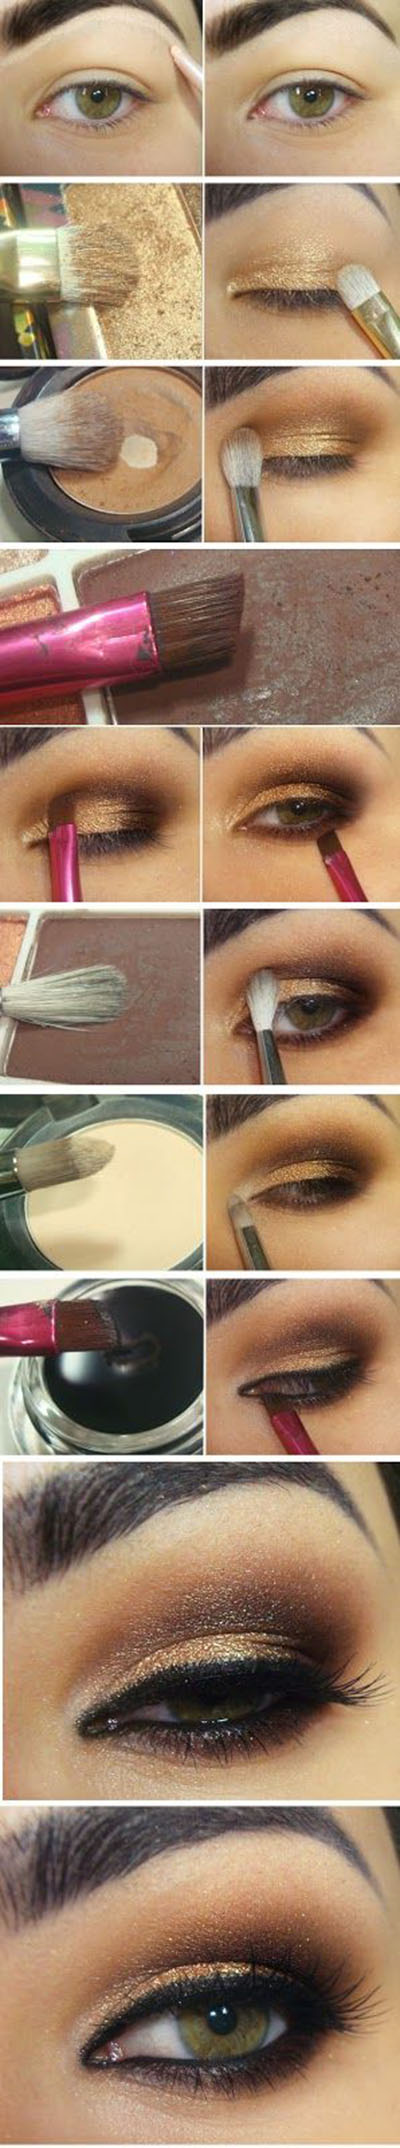 19  Gold and Brown Inspired Makeup Tutorials46f32187e